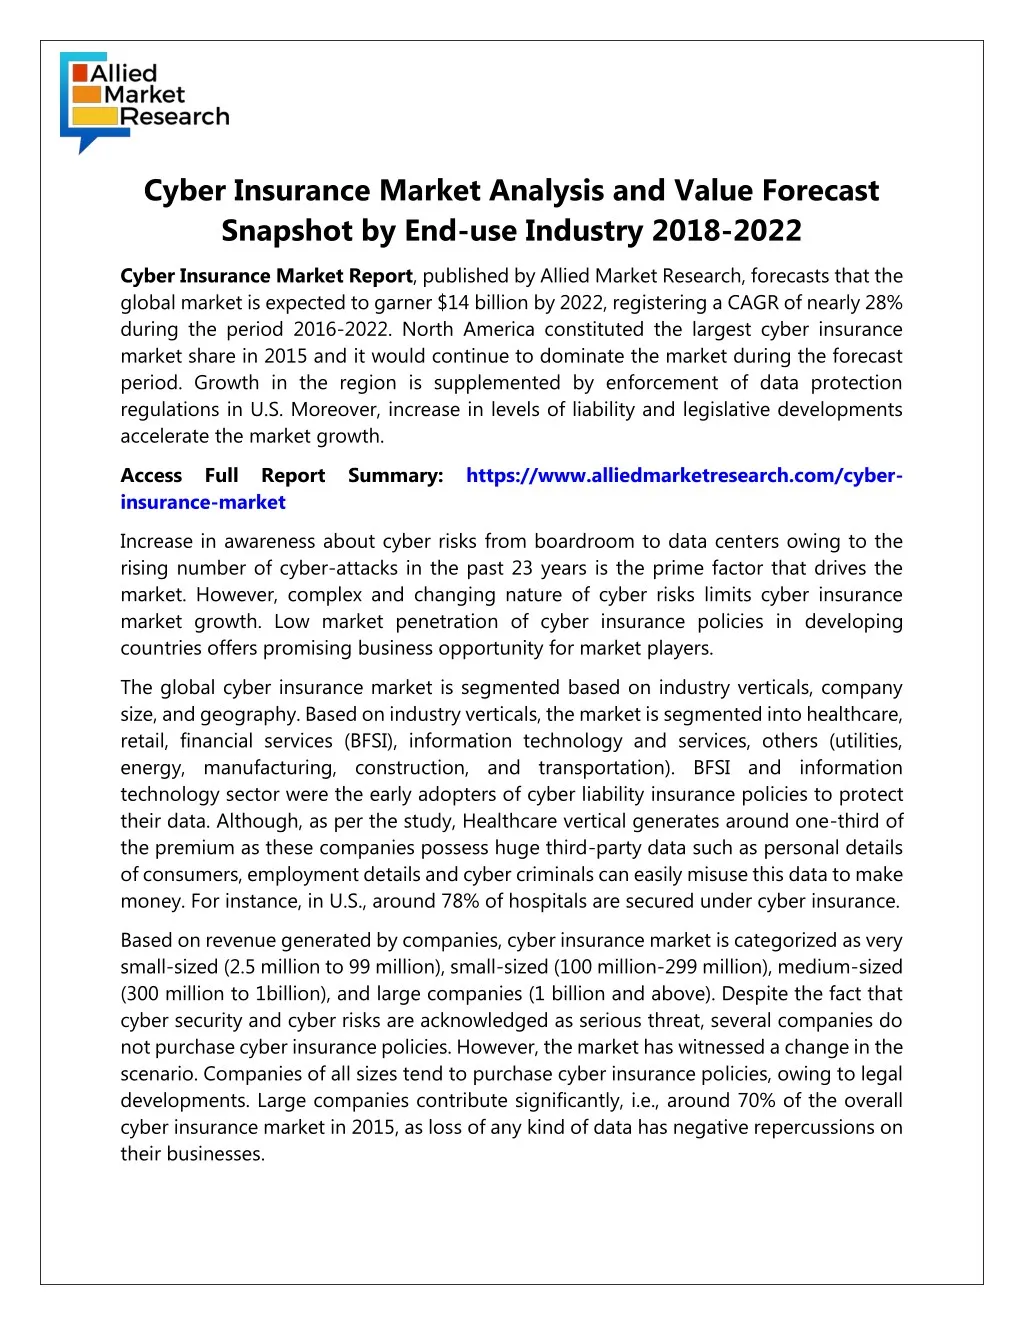 cyber insurance market analysis and value